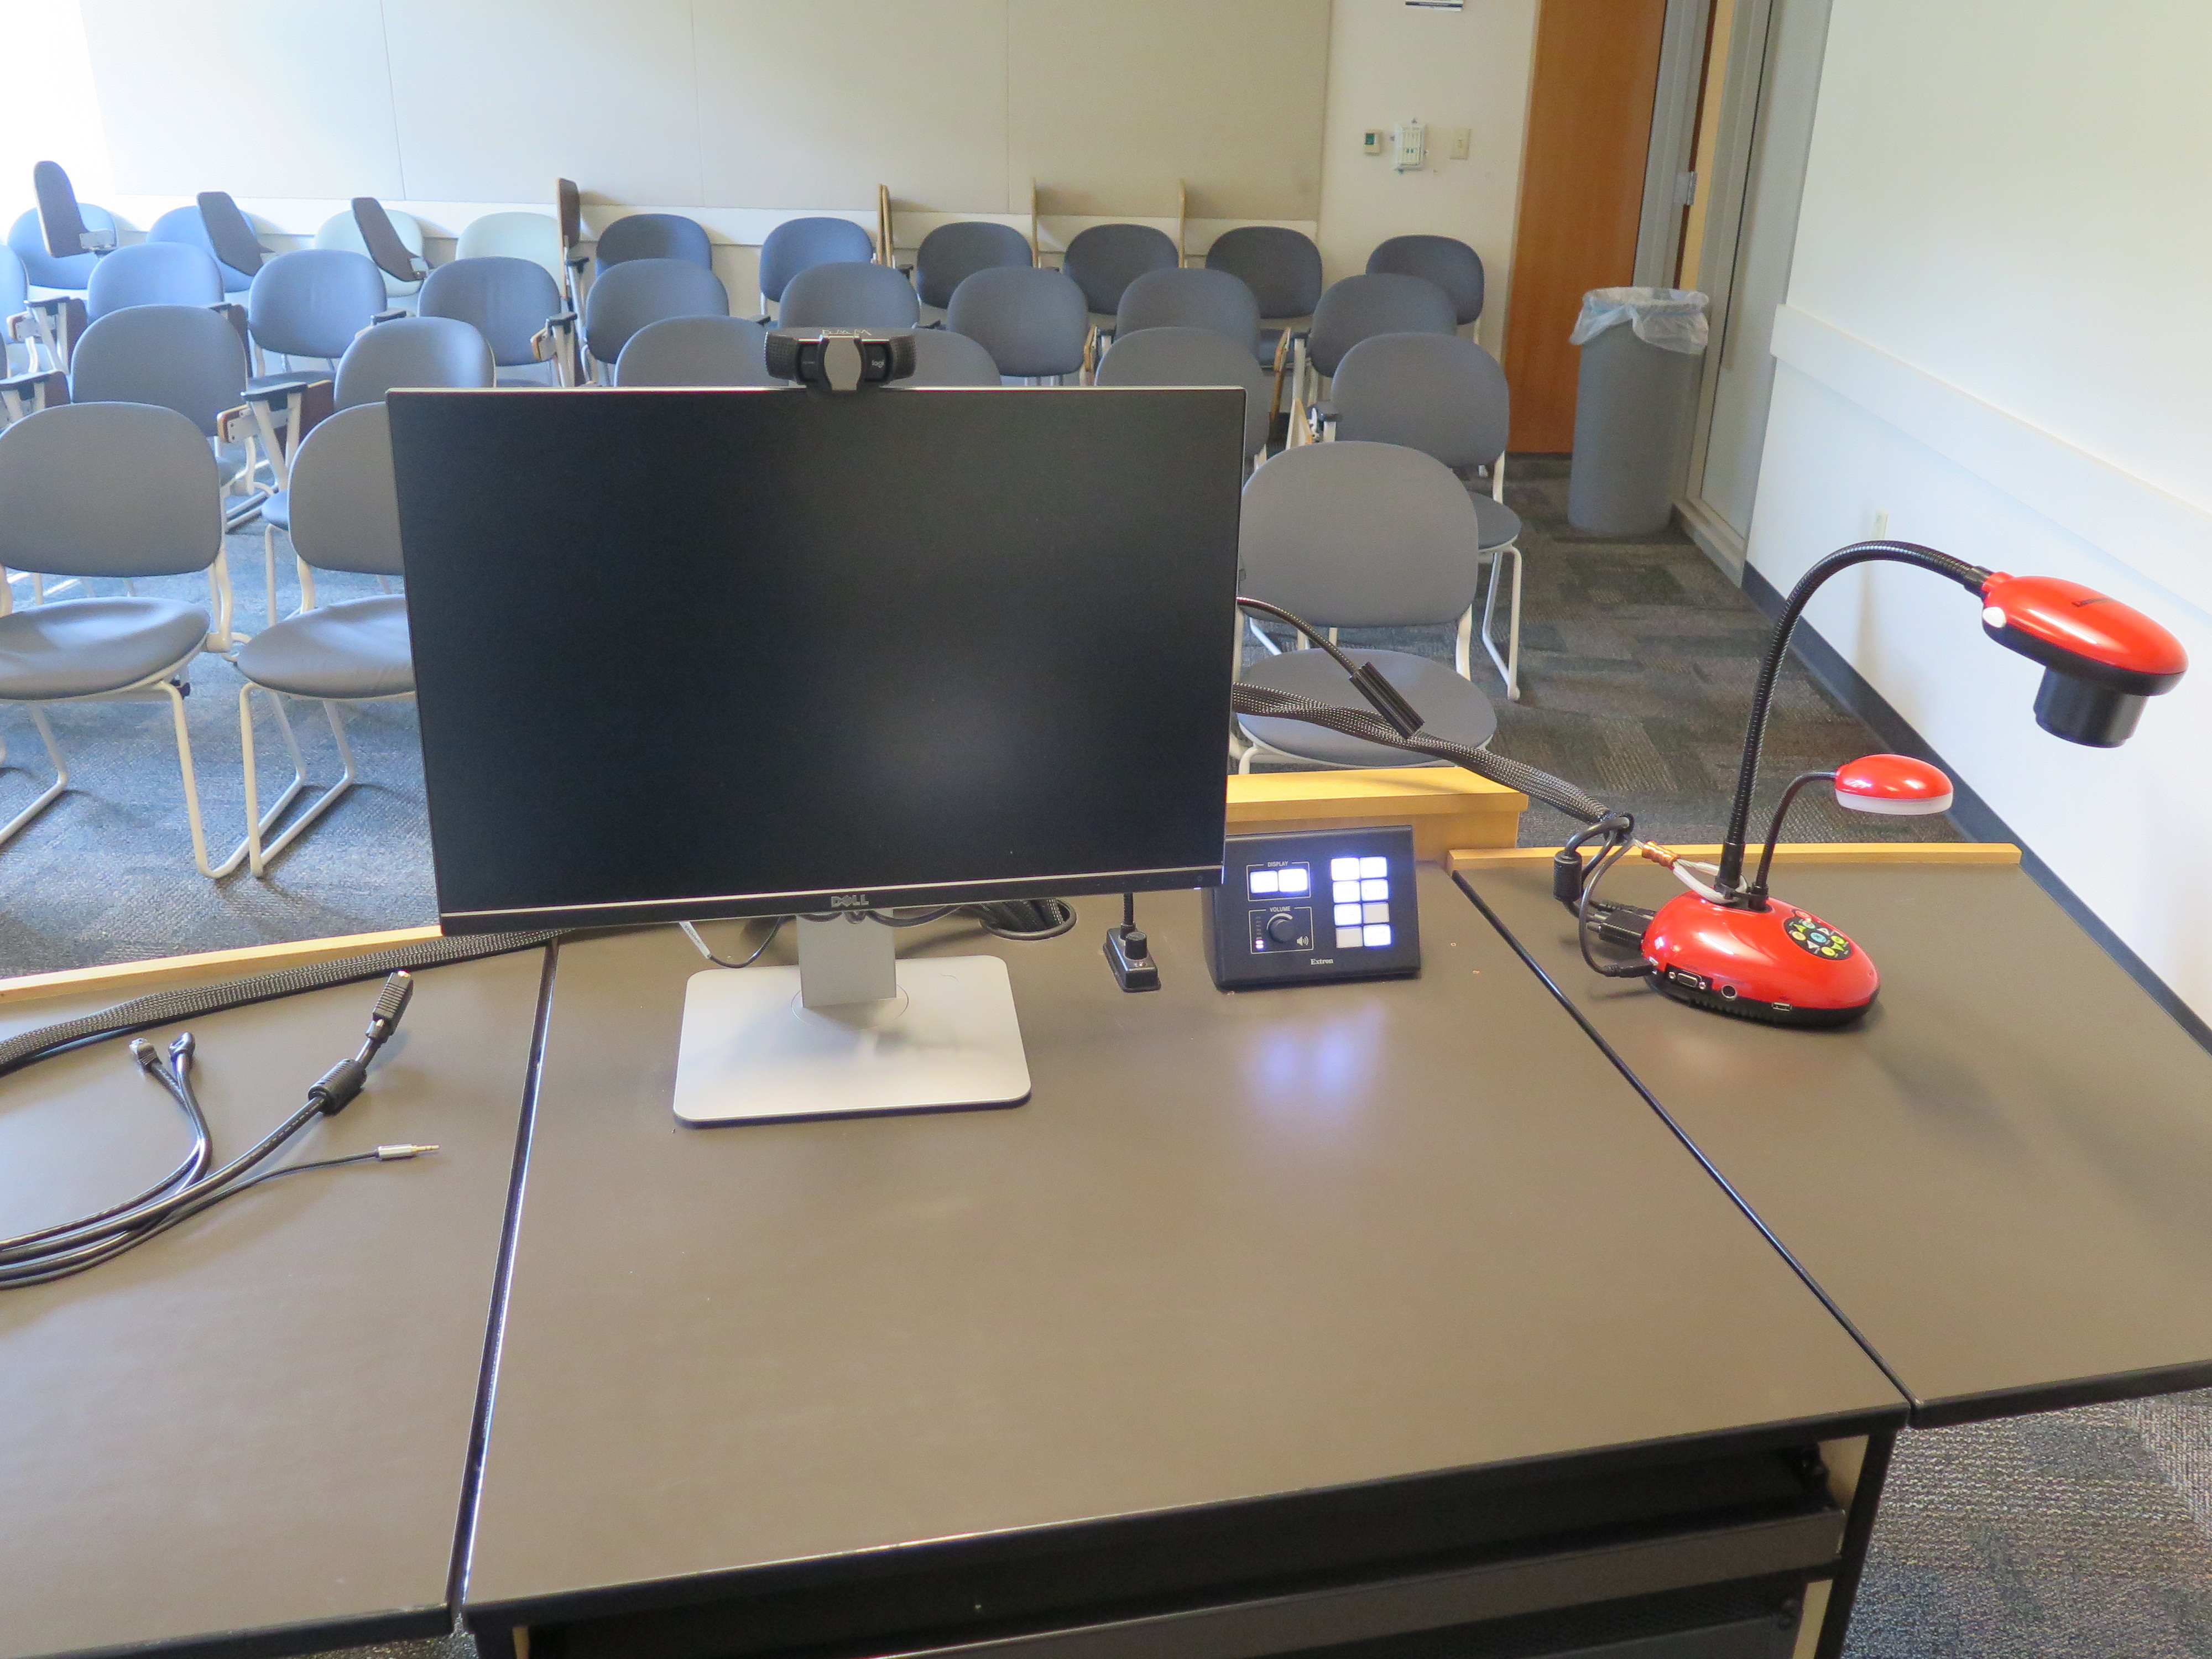 On top of Podium is Logitech 920 Webcam, Dell Computer Monitor, AV Push Button Controller, and Lumens Ladybug Document Camera.